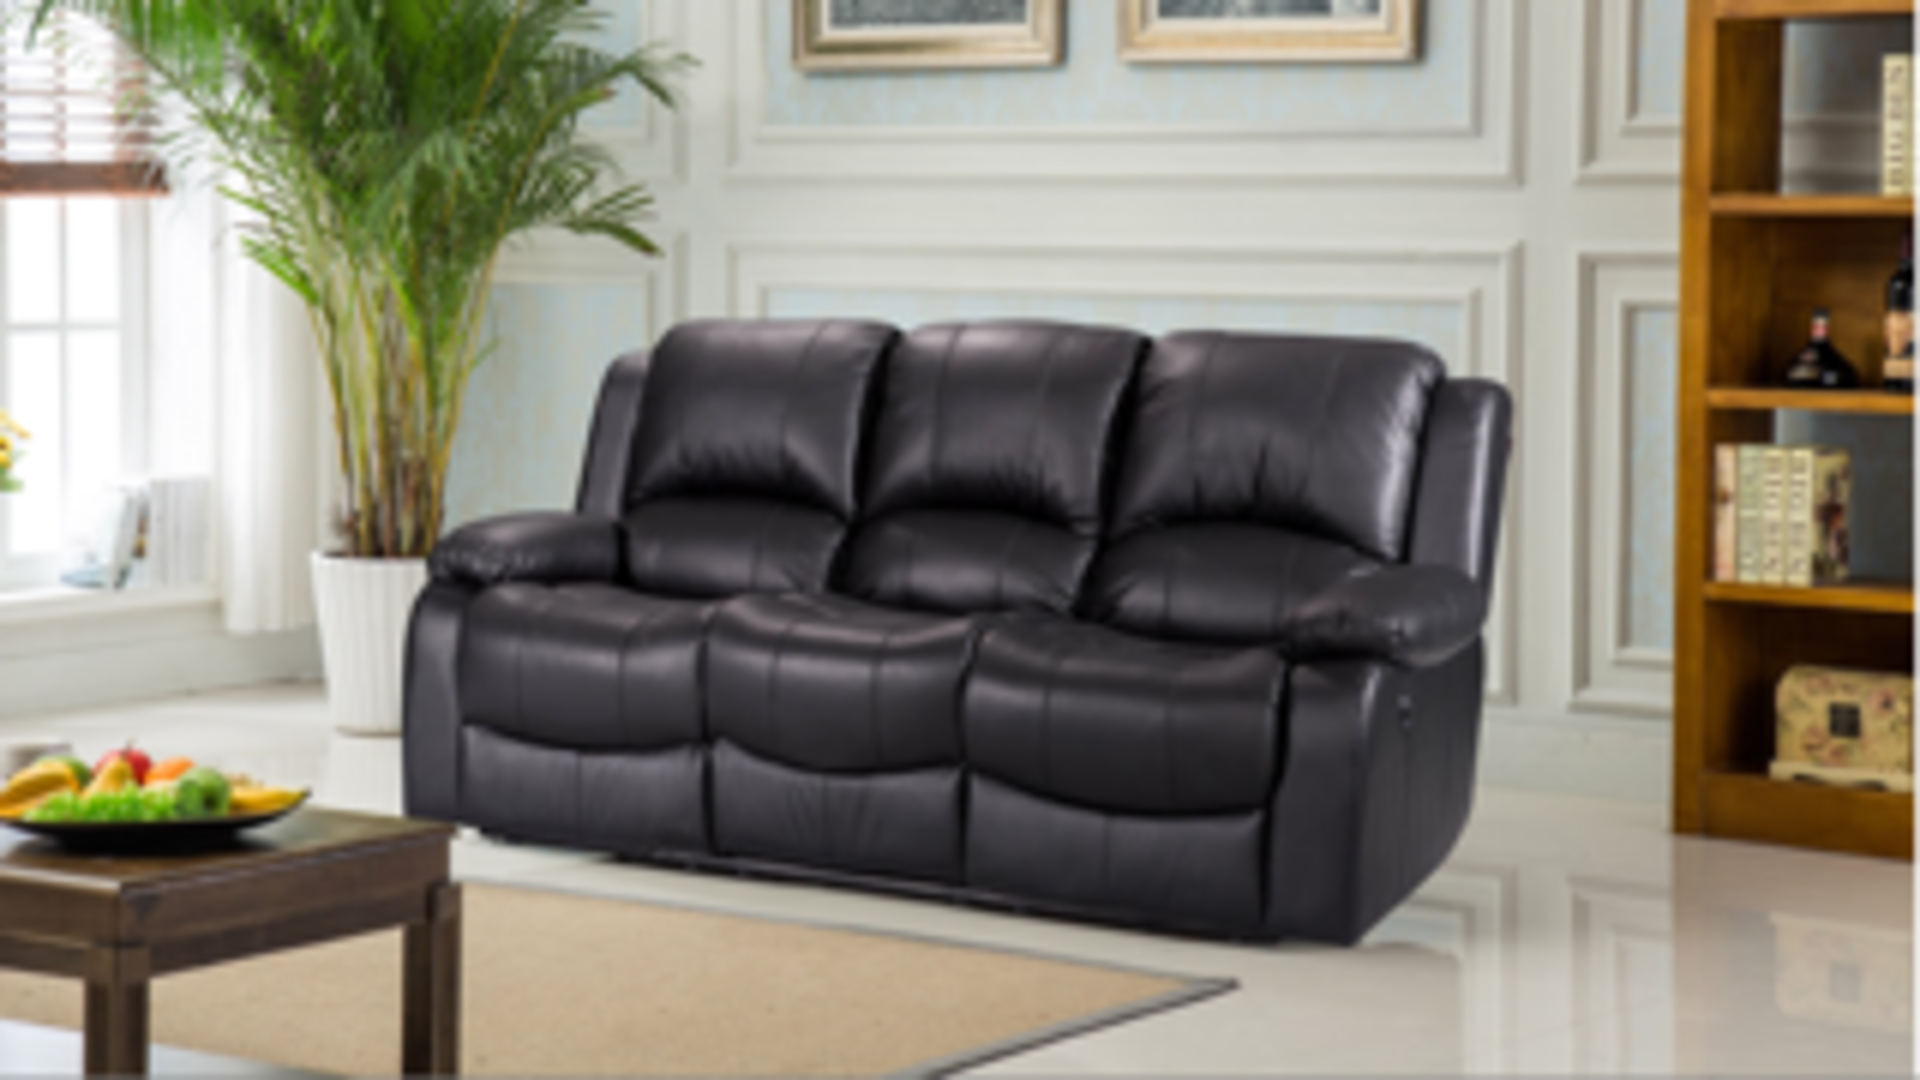 Brand new boxed Vancouver 3 seater plus 2 seater black leather reclining sofas - Image 3 of 3